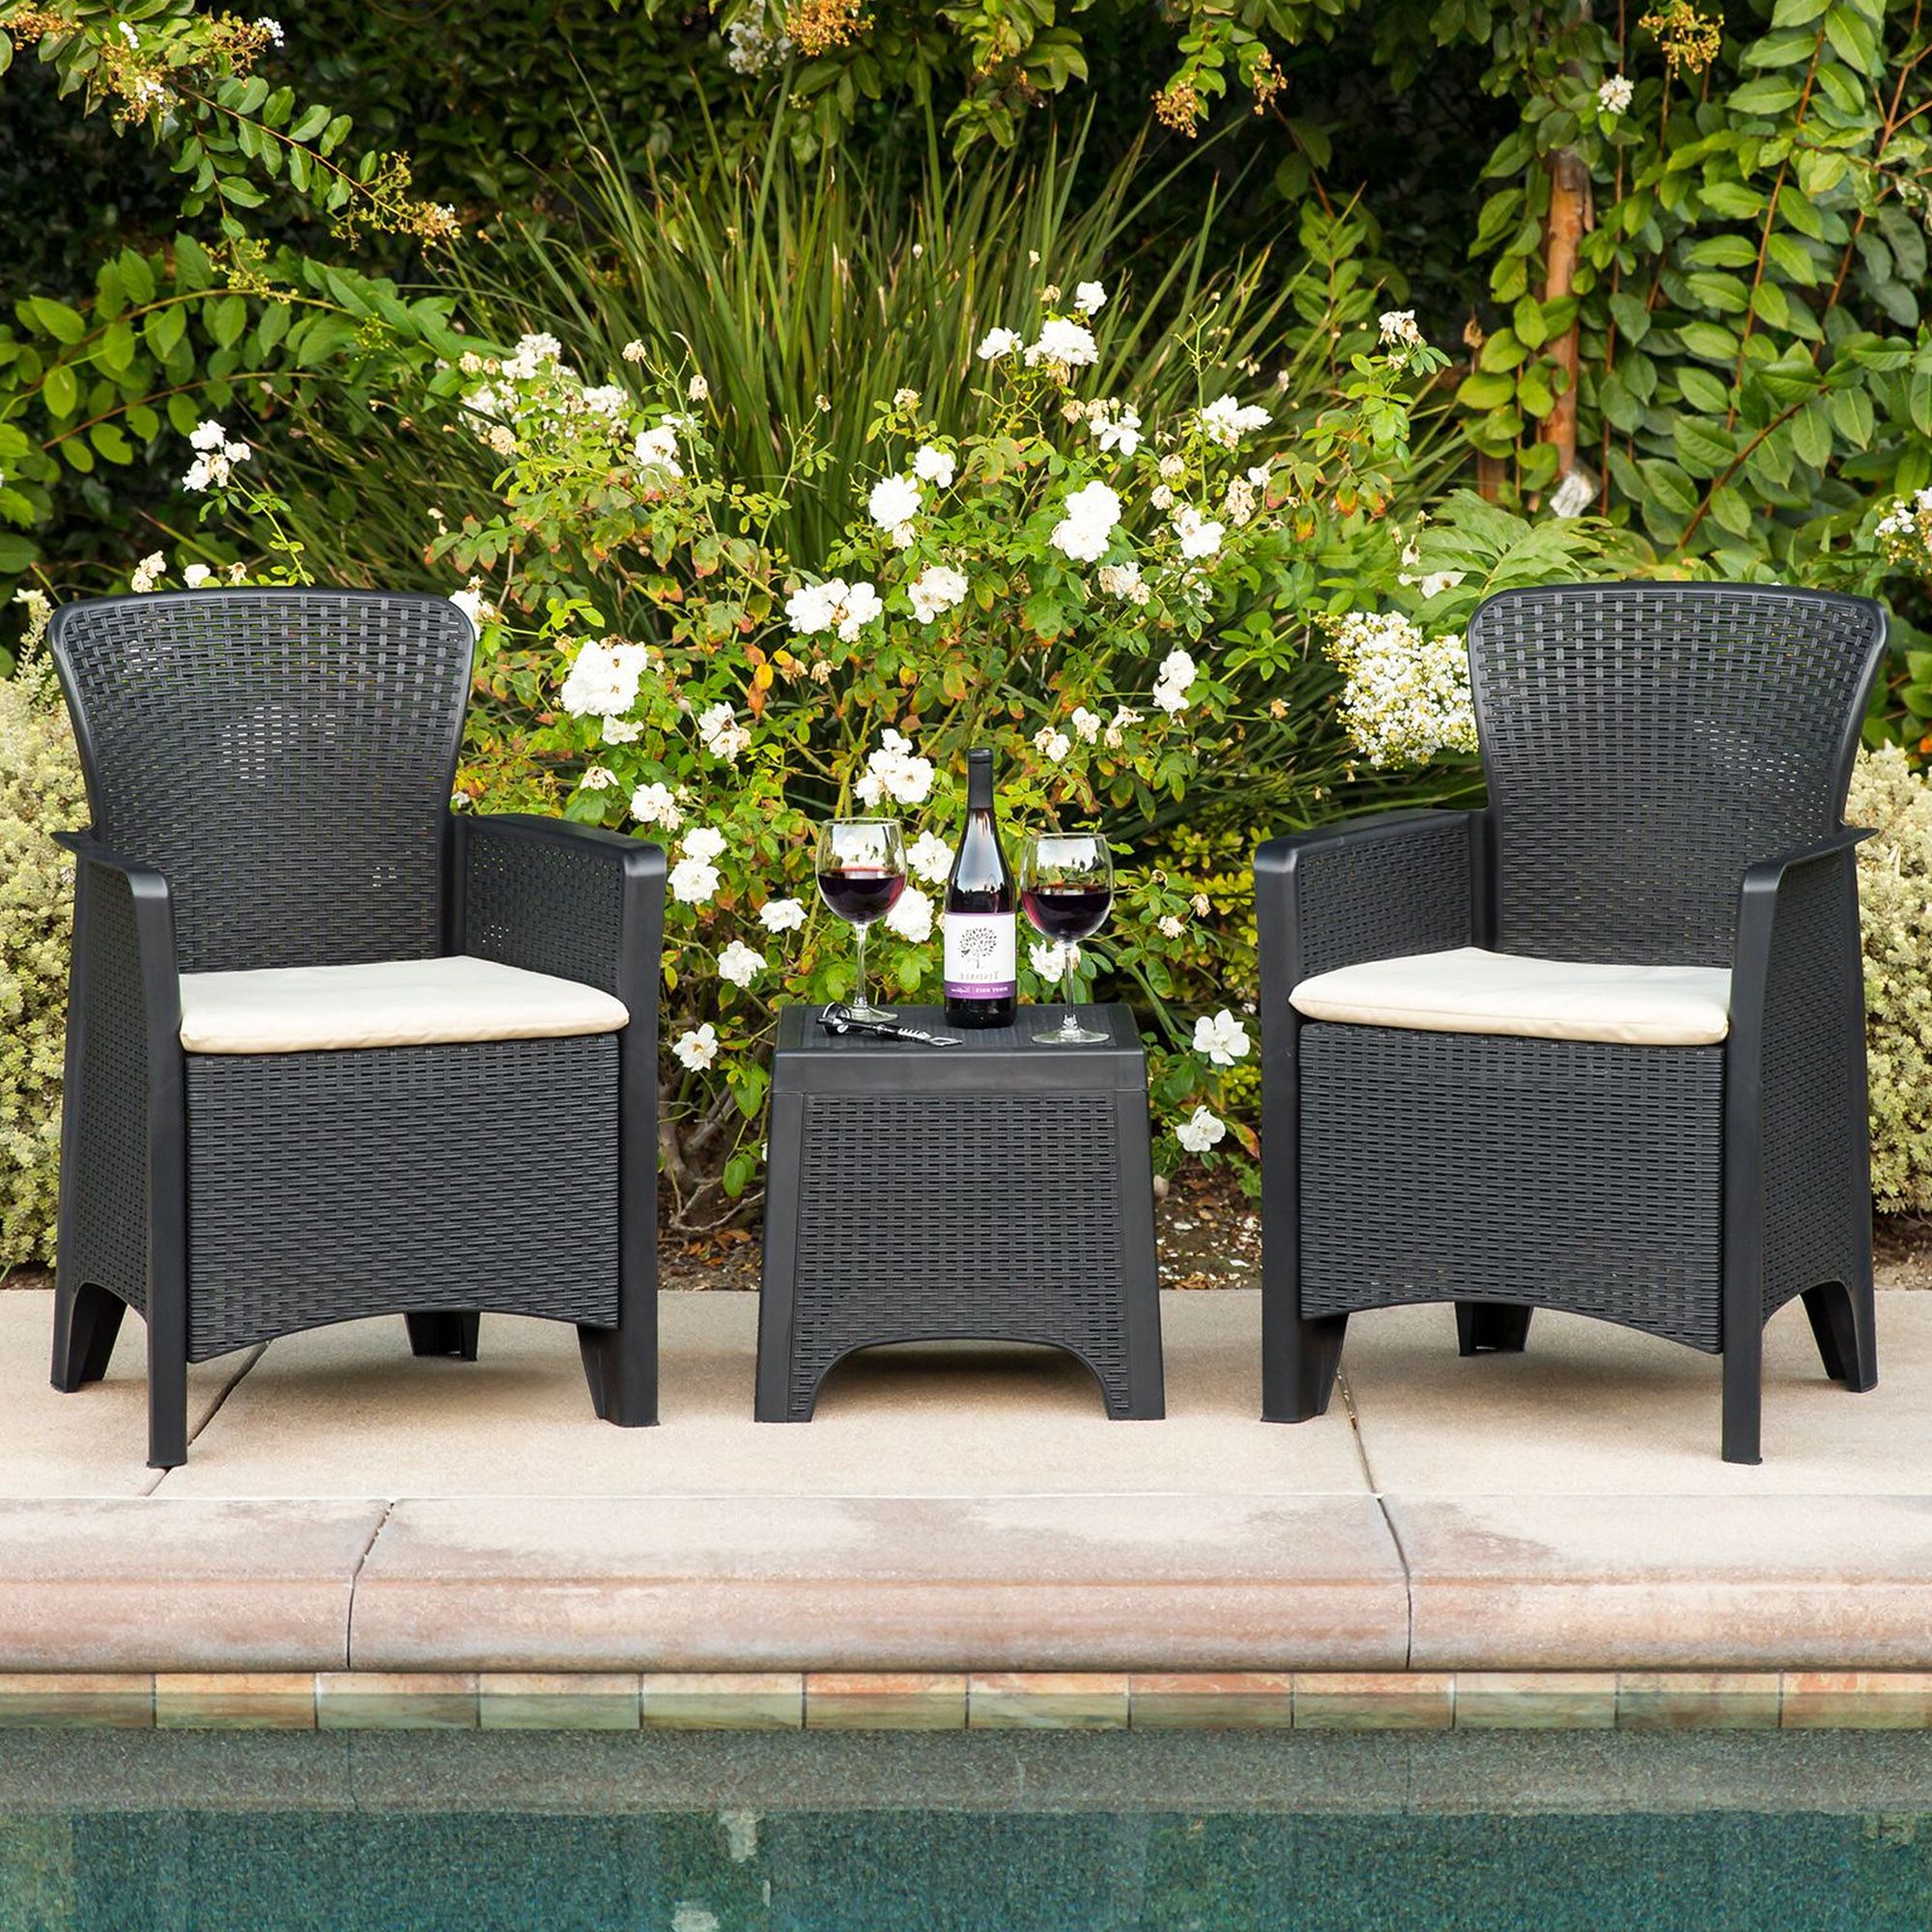 Best Choice Products 3 Piece Weather Resistant Resin Patio Bistro In Popular 3 Piece Patio Bistro Sets (View 14 of 15)